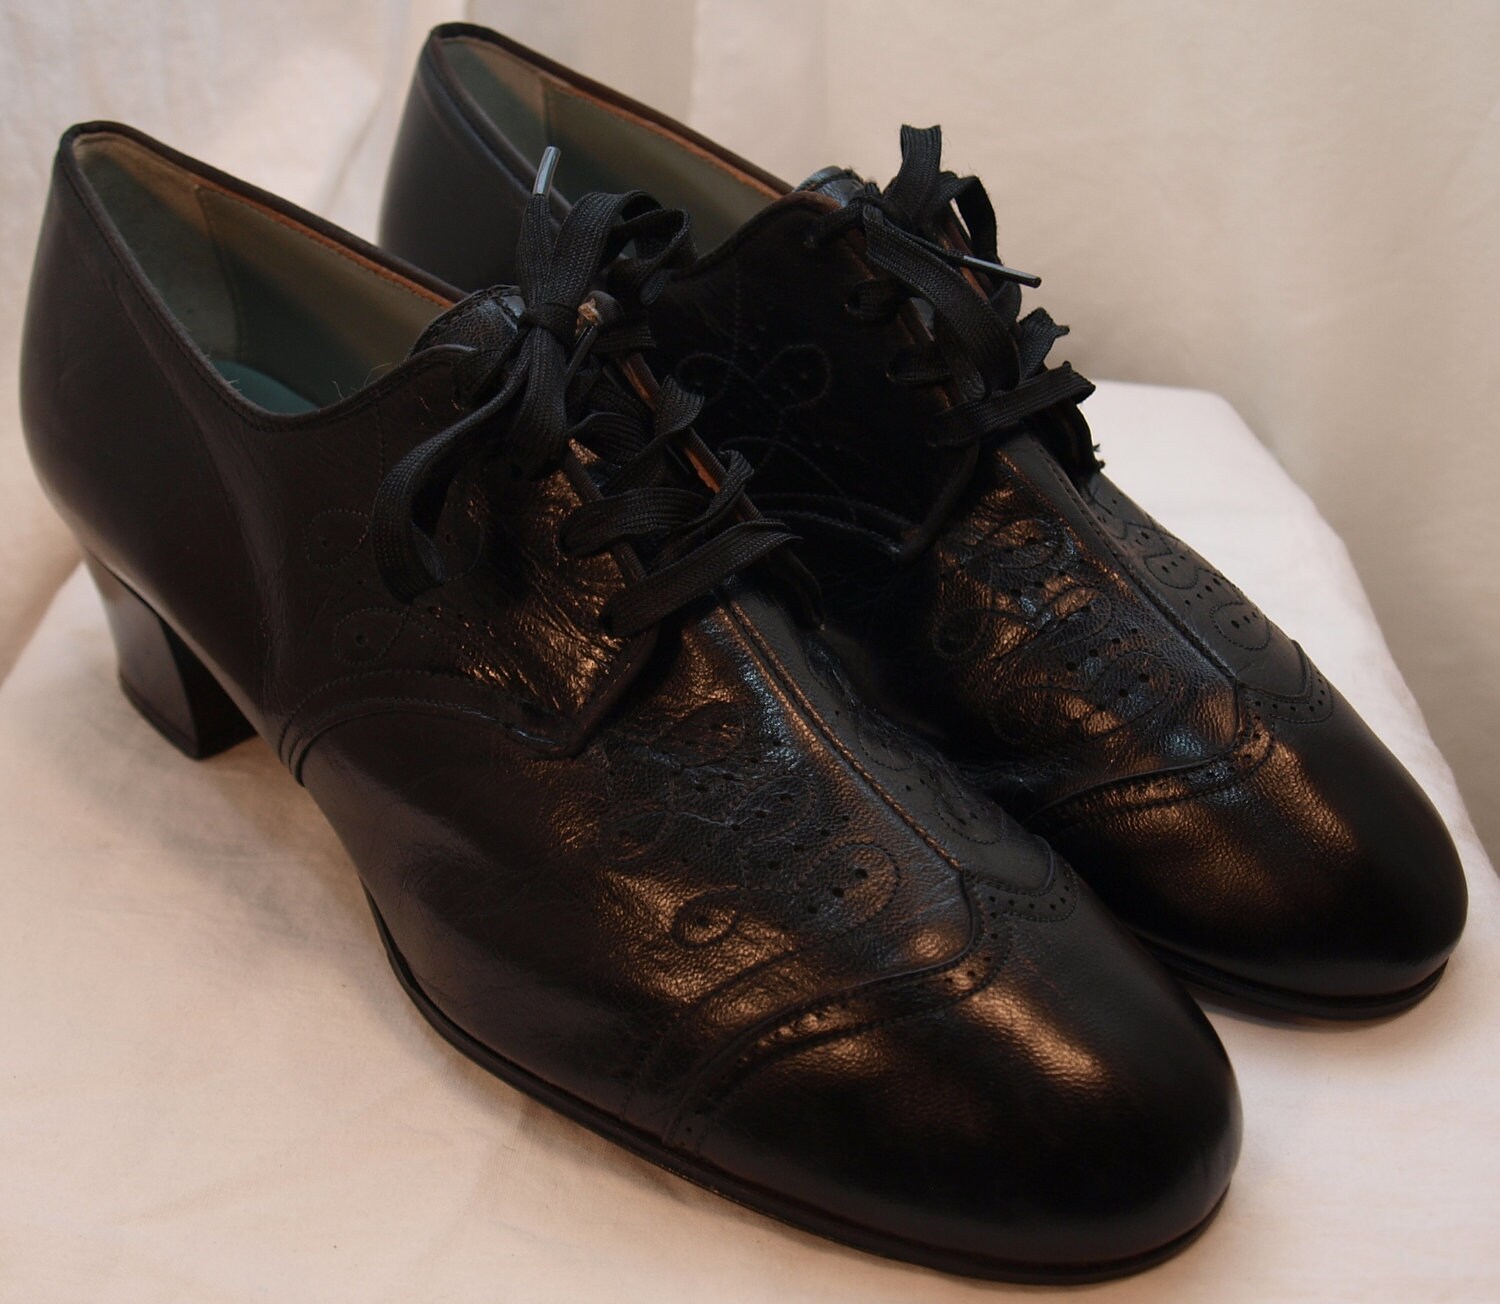 Vintage Enna Jettick Oxford Heels in Black Size 8 Ornate and